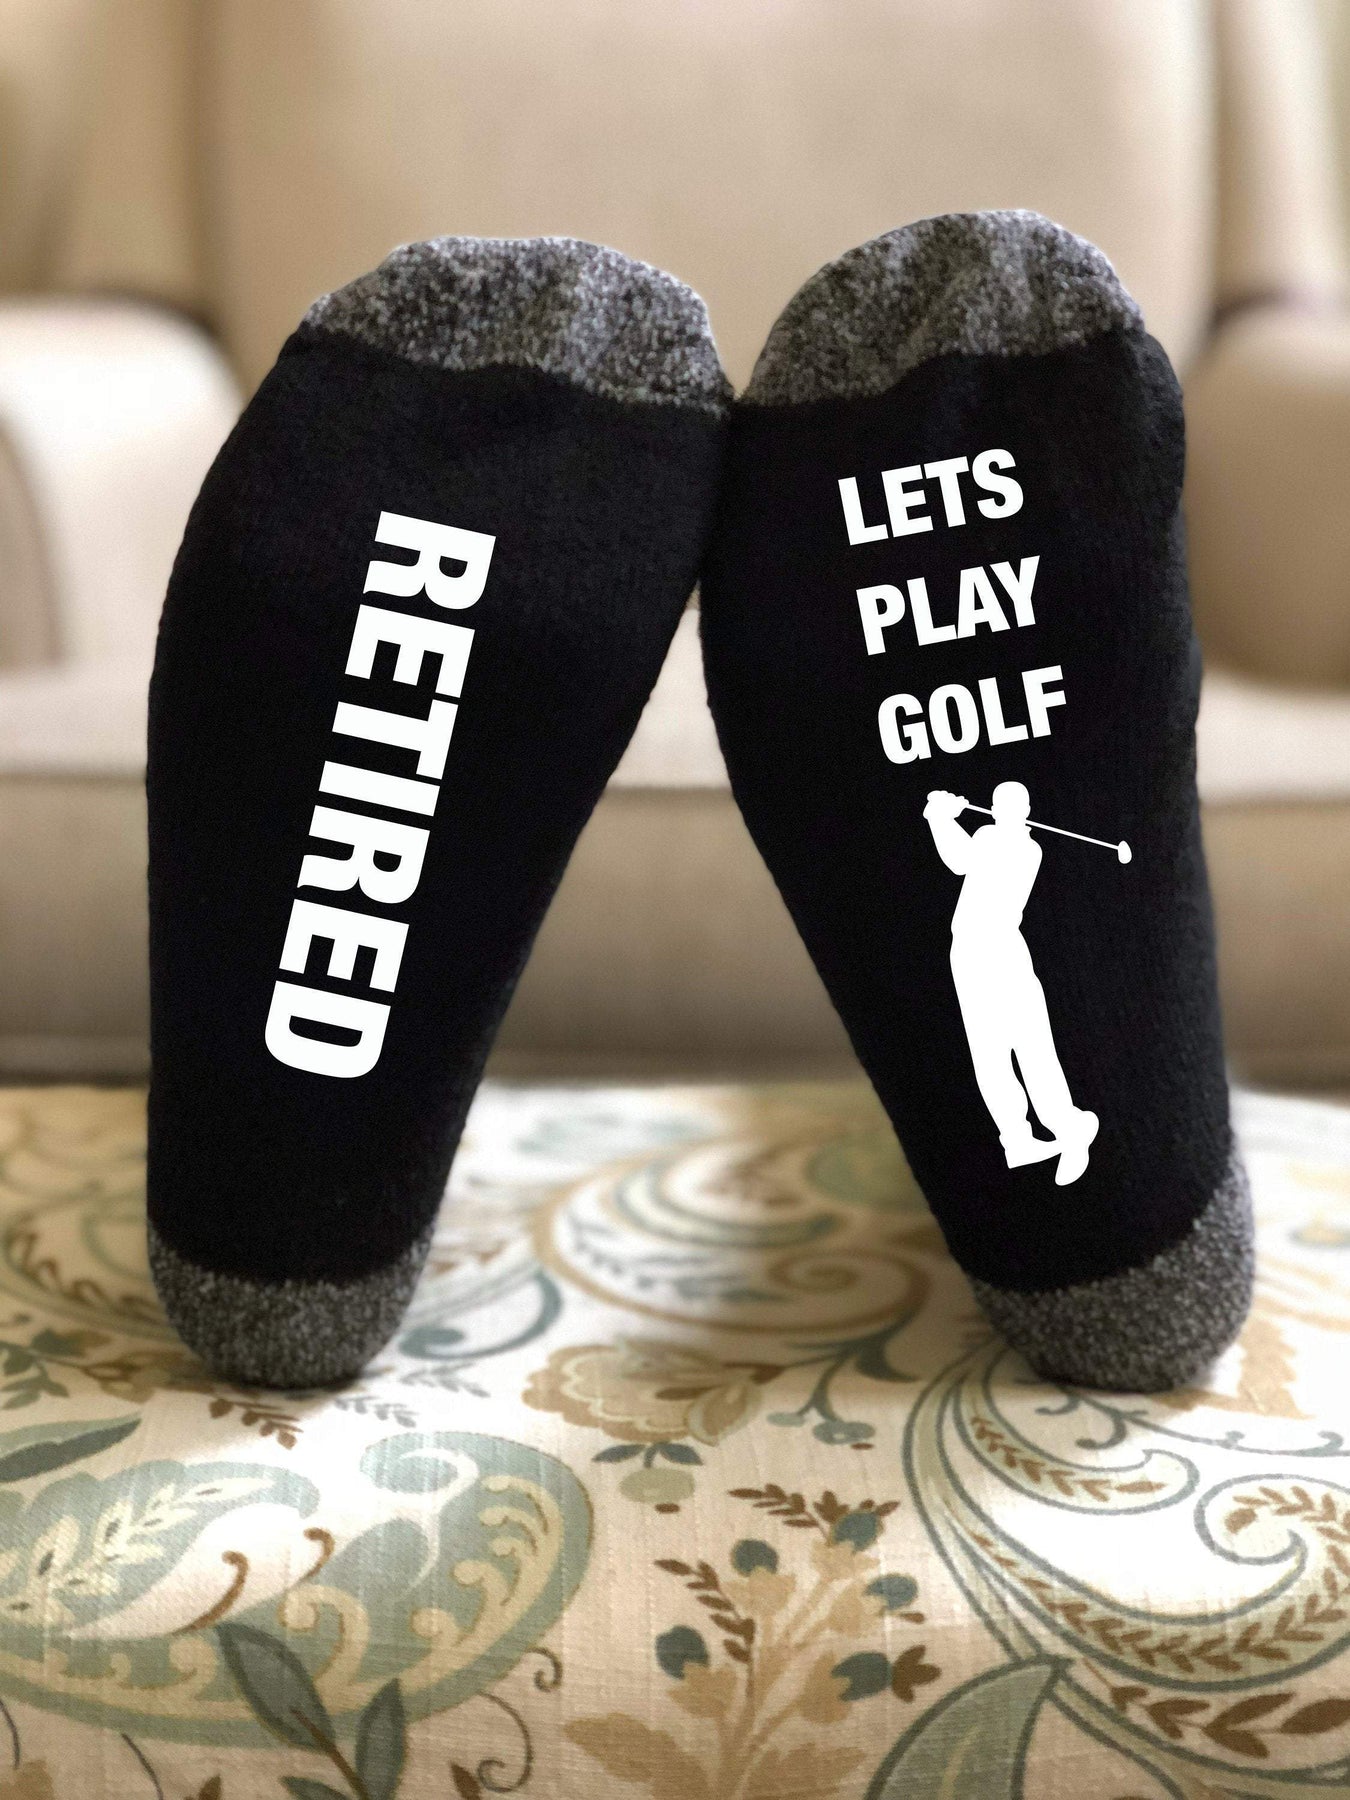 Retired Take Me Fishing Funny Socks! The Perfect, Retirement, Christmas or Father's Day Gift?